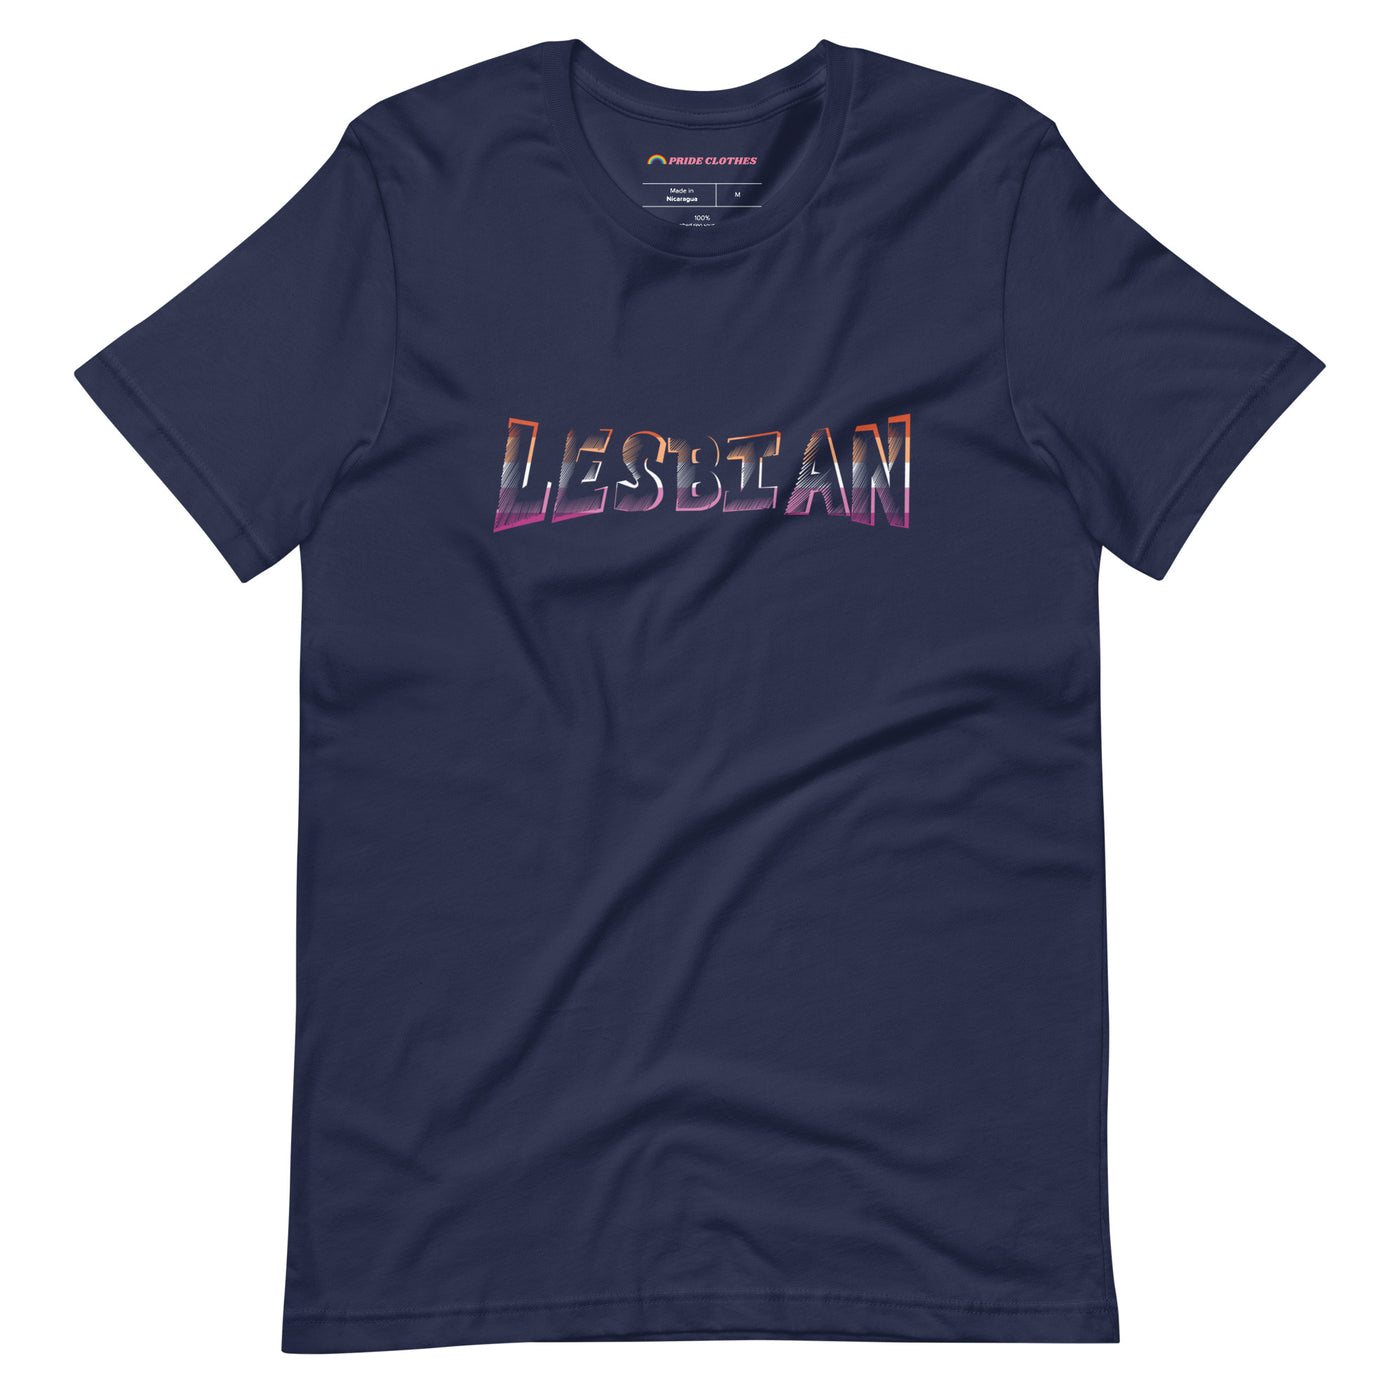 Pride Clothes - Street Style Lesbian Pride Flag Colors Art T-Shirt - Navy